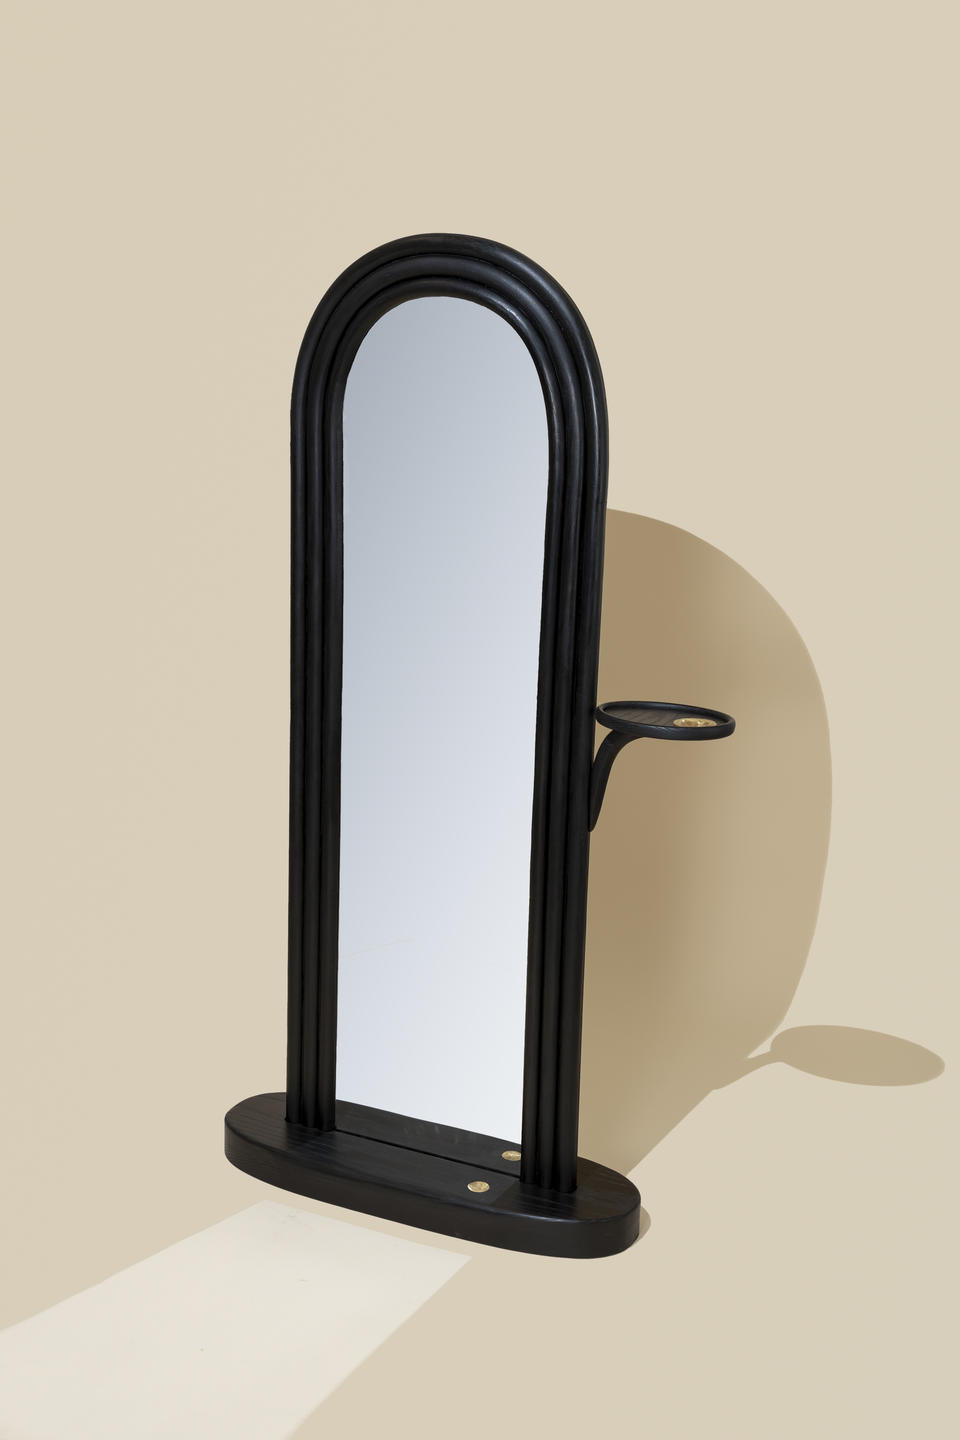 Black archway double sided mirror with hammered bronze details